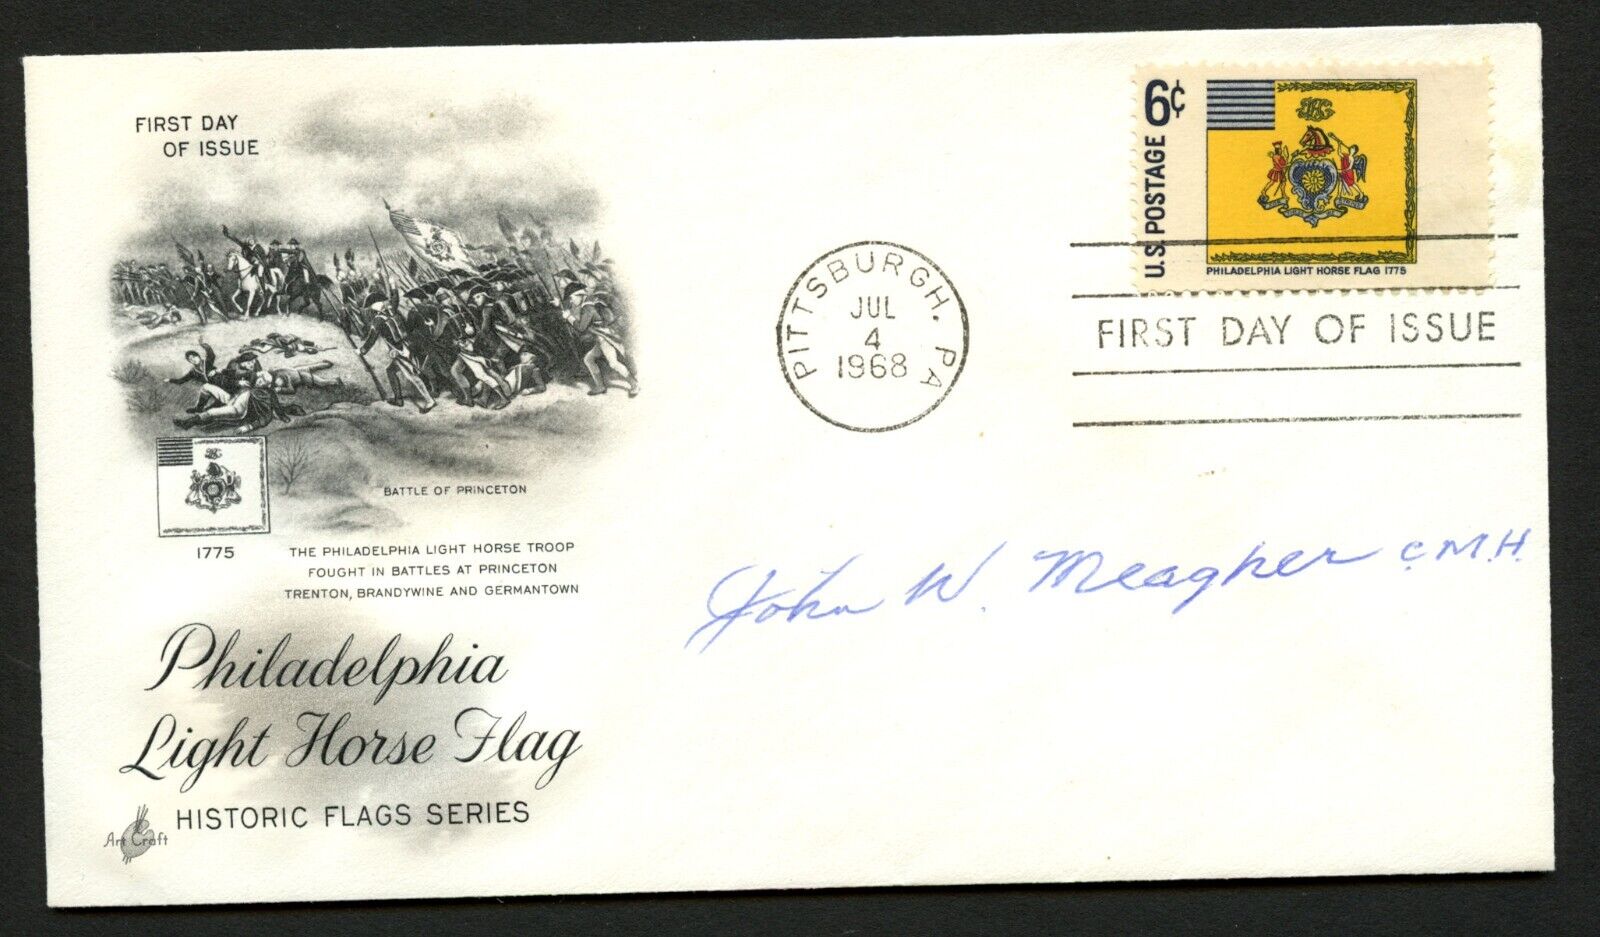 John W. Meagher d1996 signed autograph FDC Medal of Honor Recipient US Army WWII